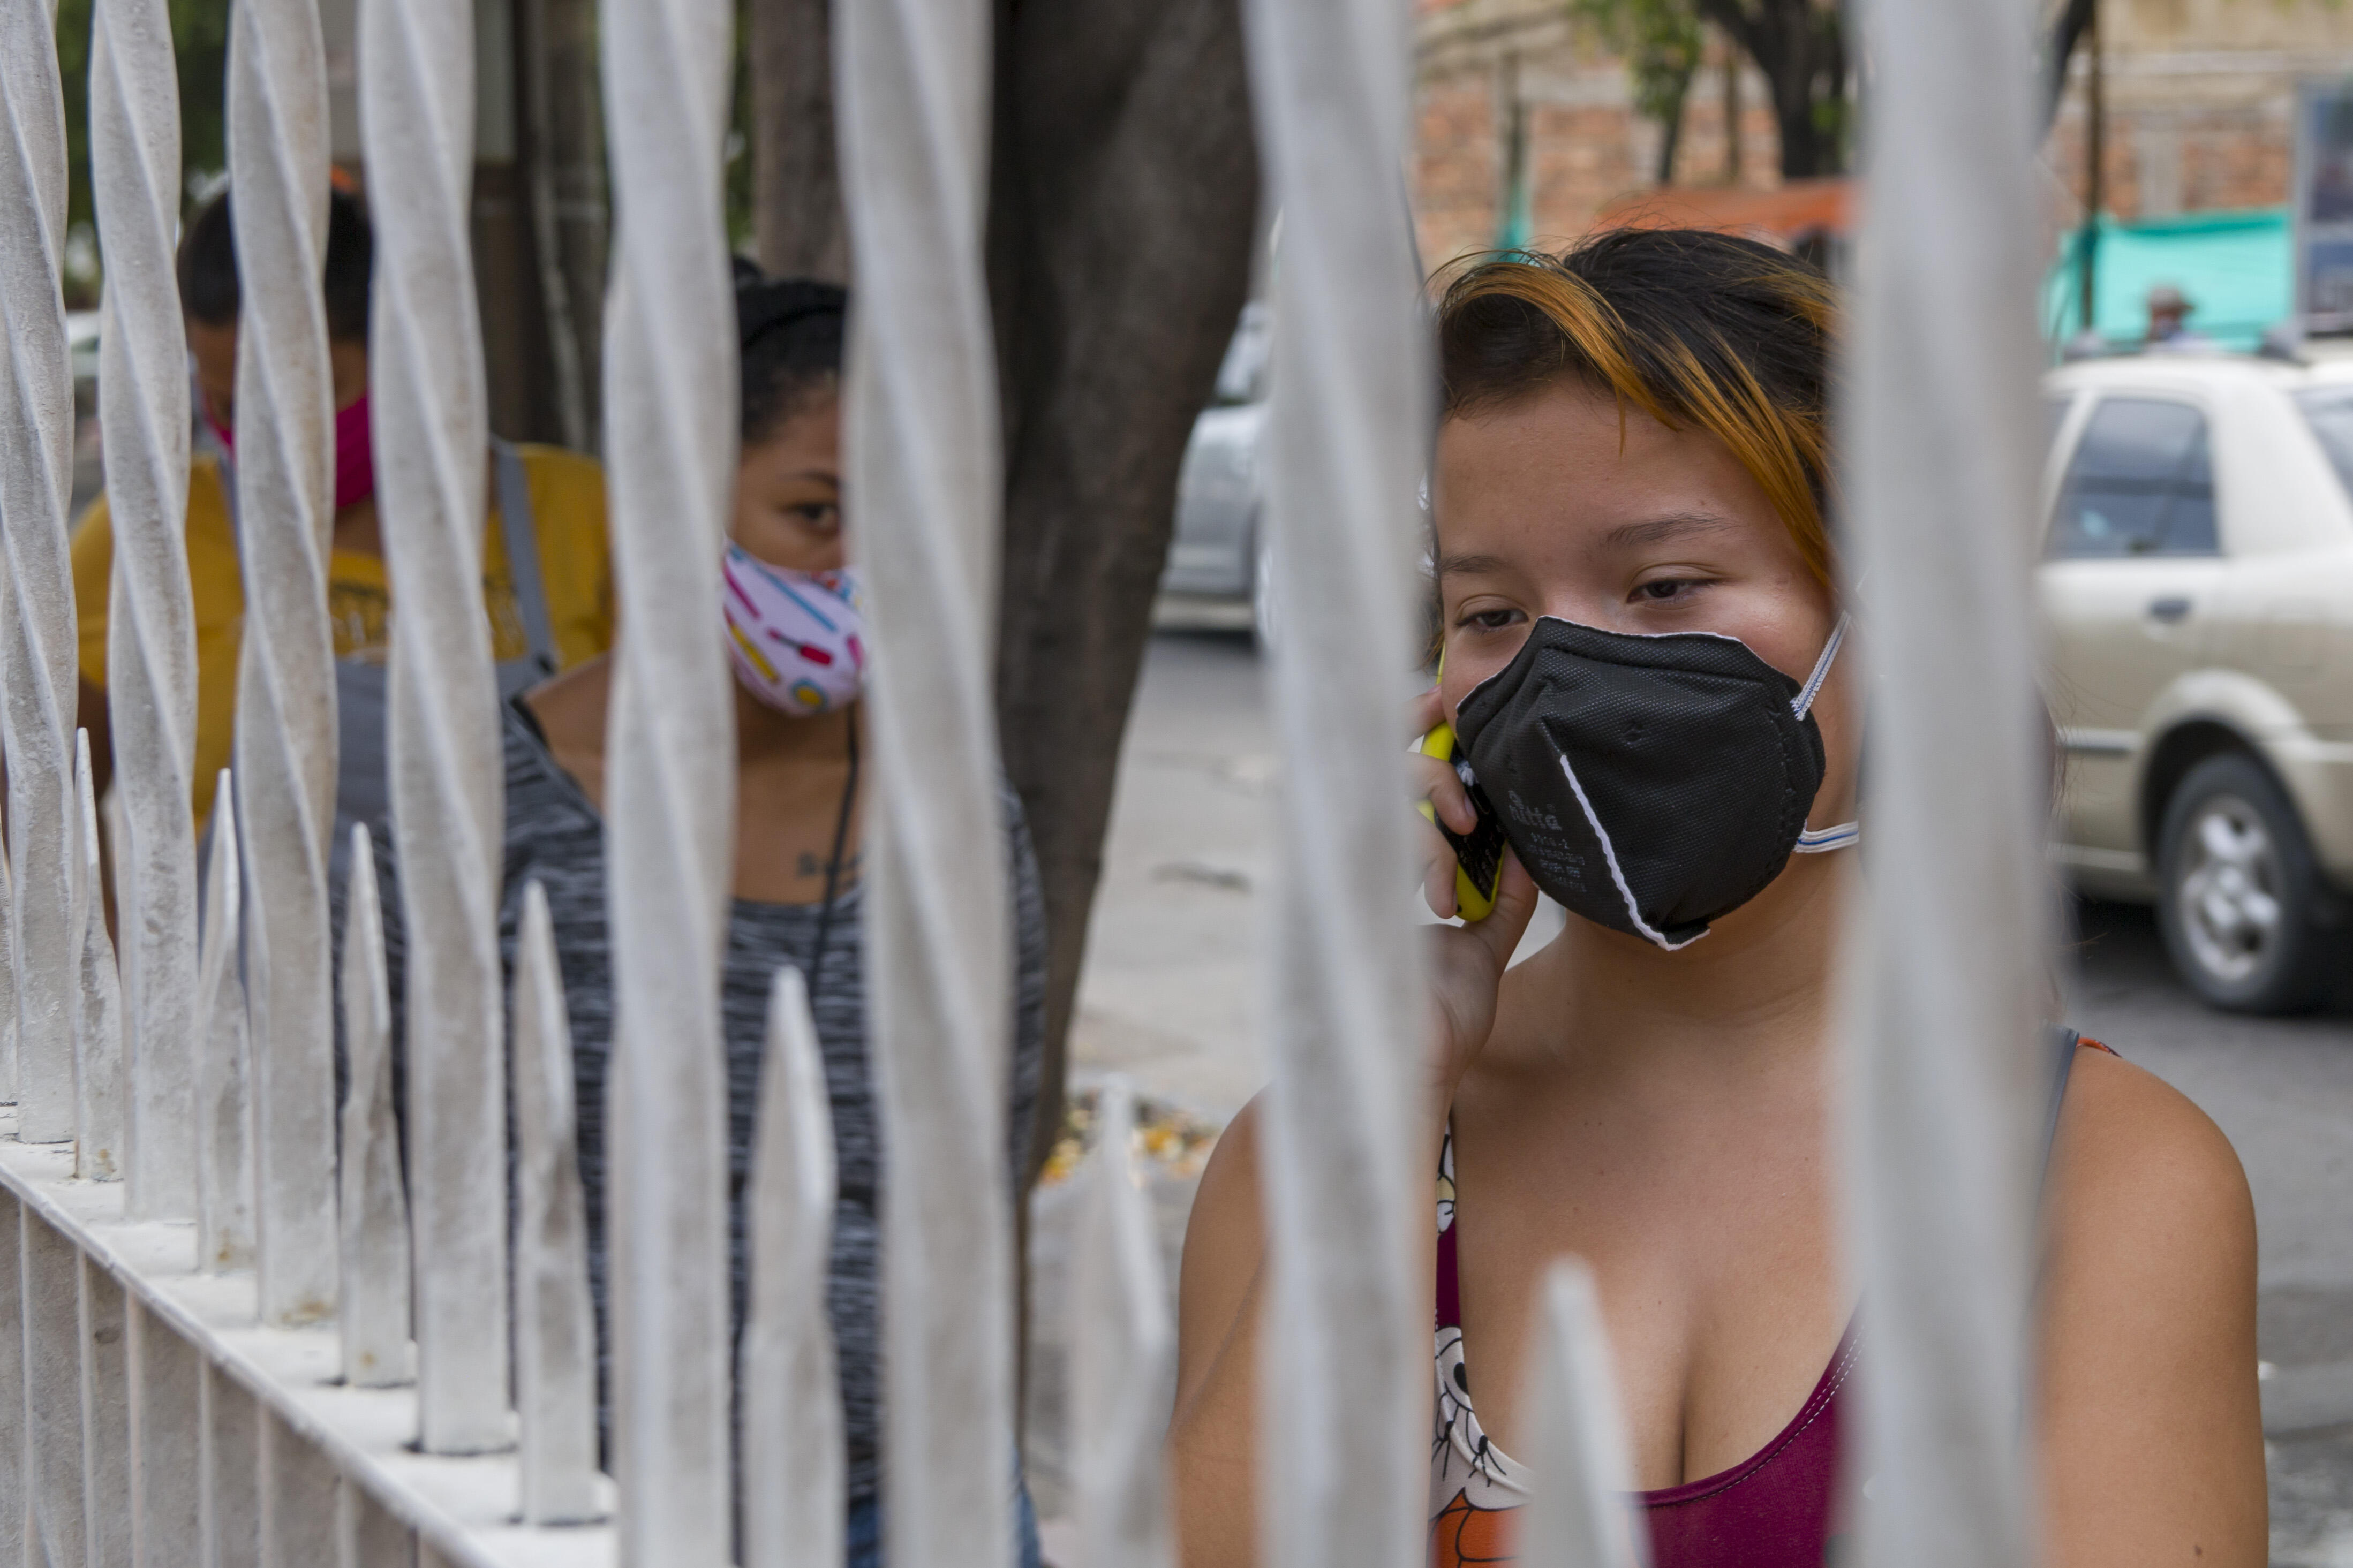 Women wearing face masks wait alongside a fence to enter an IRC health clinic on the Colombia/Venezuela border. One talks on her mobile phone.